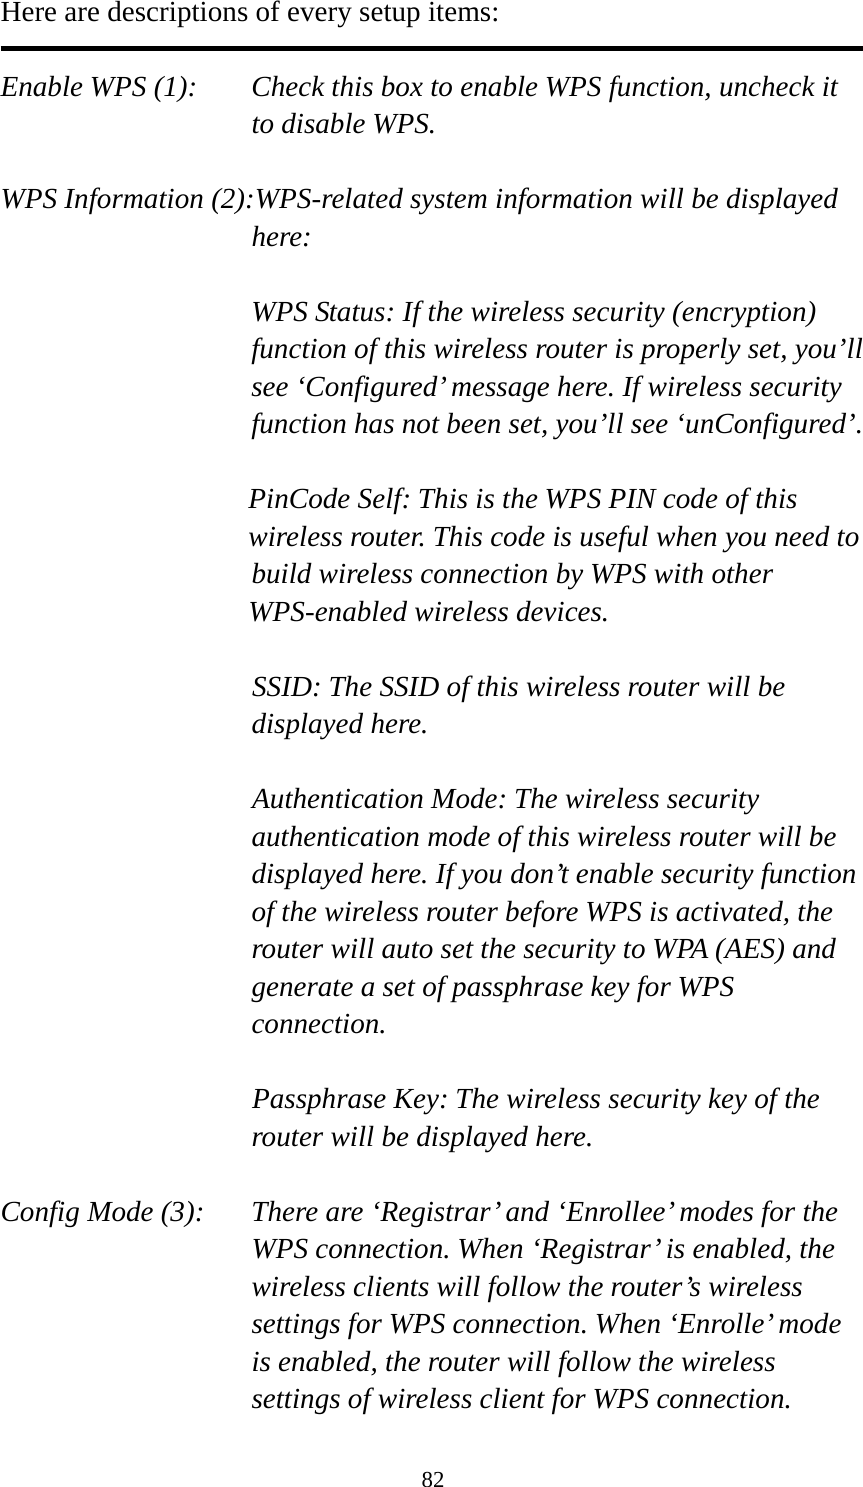 82 Here are descriptions of every setup items:  Enable WPS (1):  Check this box to enable WPS function, uncheck it to disable WPS.  WPS Information (2):WPS-related system information will be displayed here:  WPS Status: If the wireless security (encryption) function of this wireless router is properly set, you’ll see ‘Configured’ message here. If wireless security function has not been set, you’ll see ‘unConfigured’.  PinCode Self: This is the WPS PIN code of this wireless router. This code is useful when you need to  build wireless connection by WPS with other WPS-enabled wireless devices.  SSID: The SSID of this wireless router will be displayed here.  Authentication Mode: The wireless security authentication mode of this wireless router will be displayed here. If you don’t enable security function of the wireless router before WPS is activated, the router will auto set the security to WPA (AES) and generate a set of passphrase key for WPS connection.  Passphrase Key: The wireless security key of the router will be displayed here.  Config Mode (3):  There are ‘Registrar’ and ‘Enrollee’ modes for the WPS connection. When ‘Registrar’ is enabled, the wireless clients will follow the router’s wireless settings for WPS connection. When ‘Enrolle’ mode is enabled, the router will follow the wireless settings of wireless client for WPS connection. 